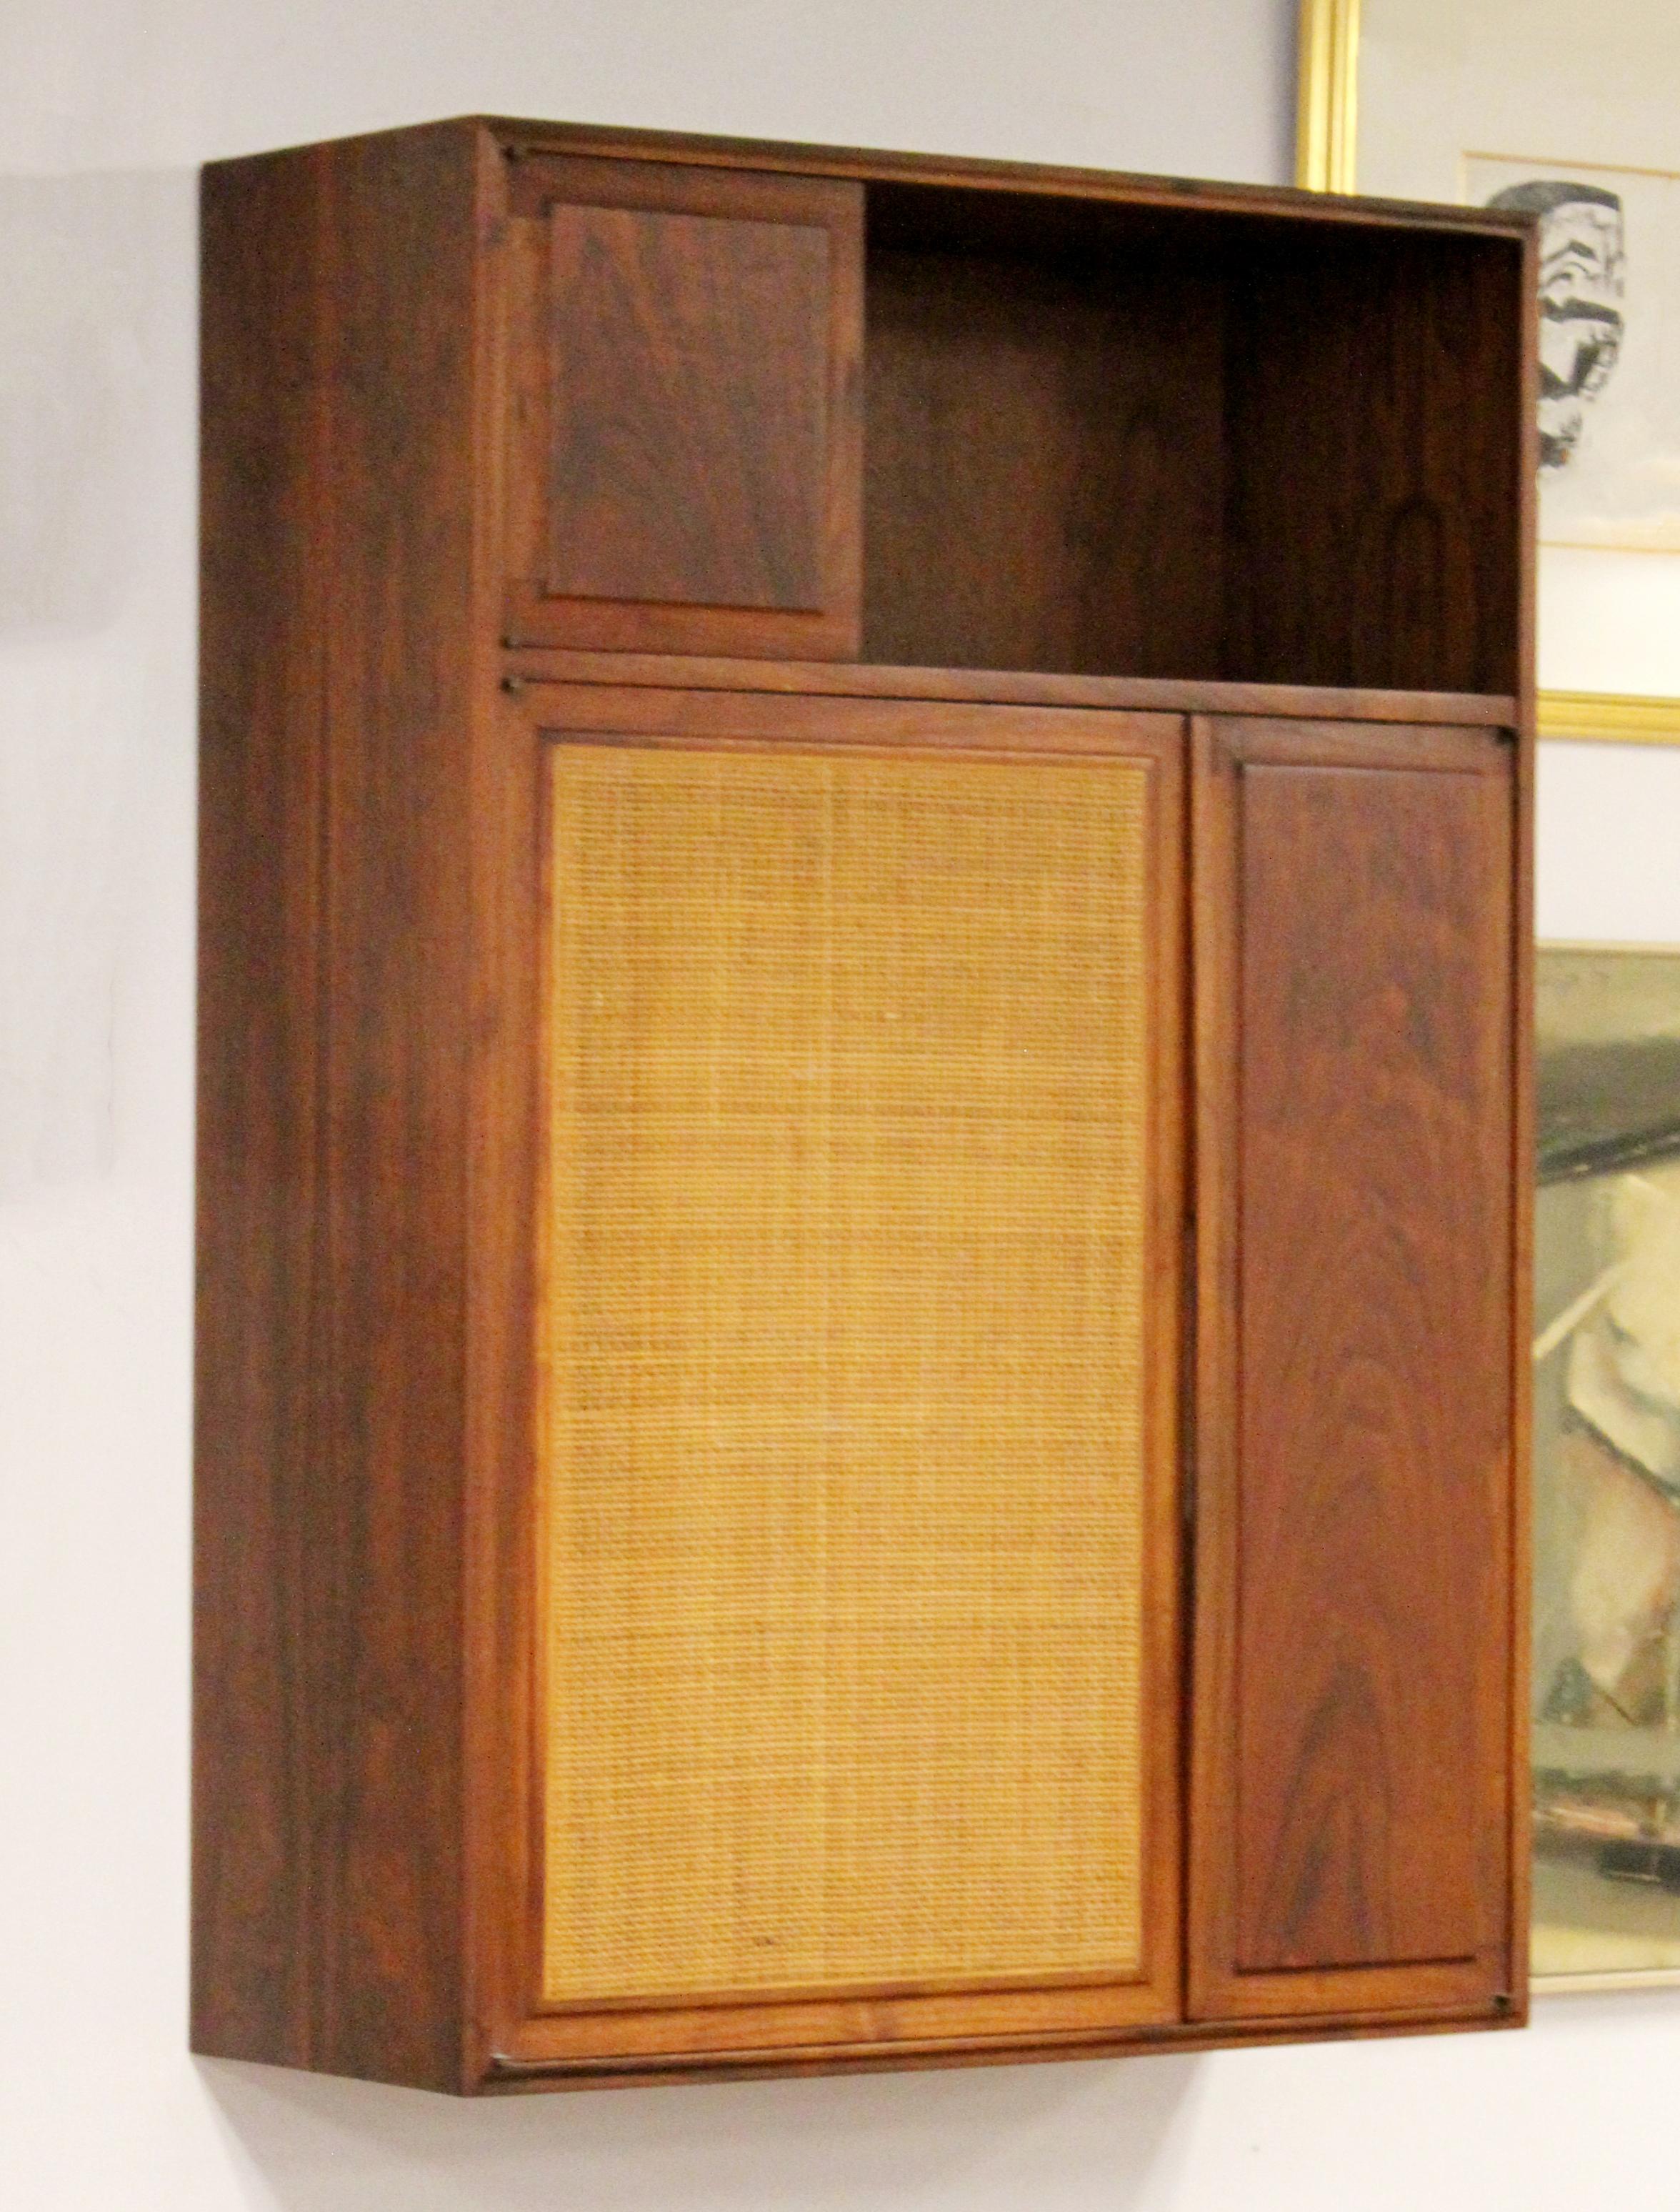 For your consideration is a fantastic, founders hanging cabinet wall unit, made of walnut wood and cane, circa 1960s. In excellent vintage condition. The dimensions are 33.5